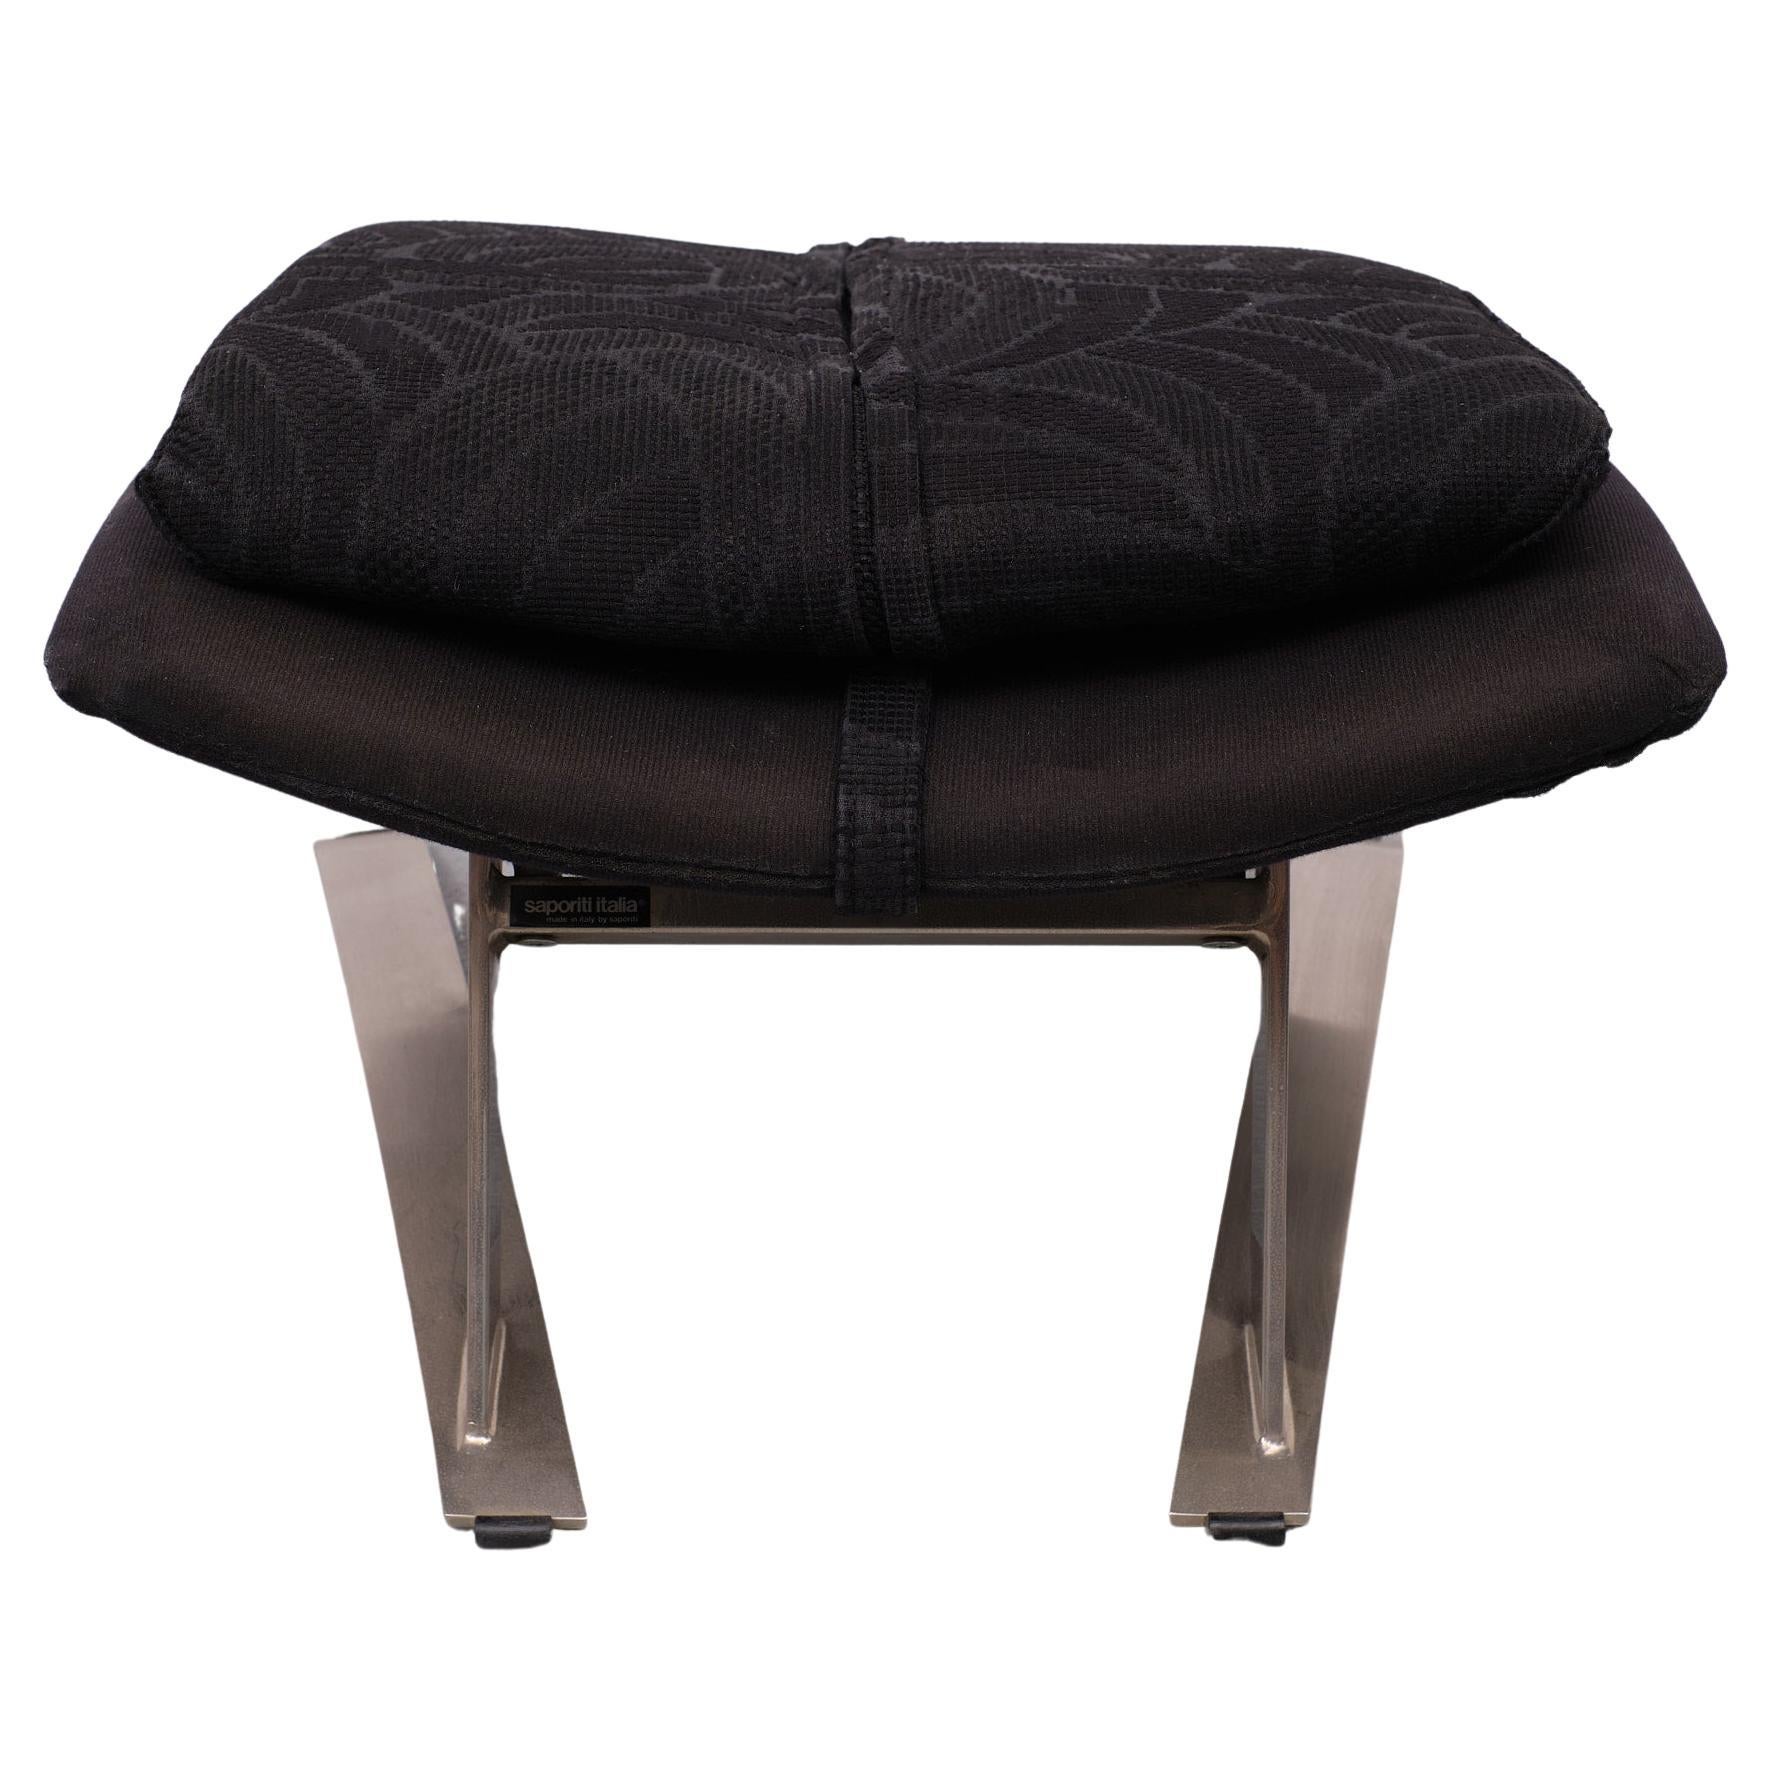 Top quality foot stool by Saporiti Italy . Solid polished Steel base comes with 
a loose cushion. Adjustable in height just by pulling it up .  
Please don't hesitate to reach out for alternative shipping quotes